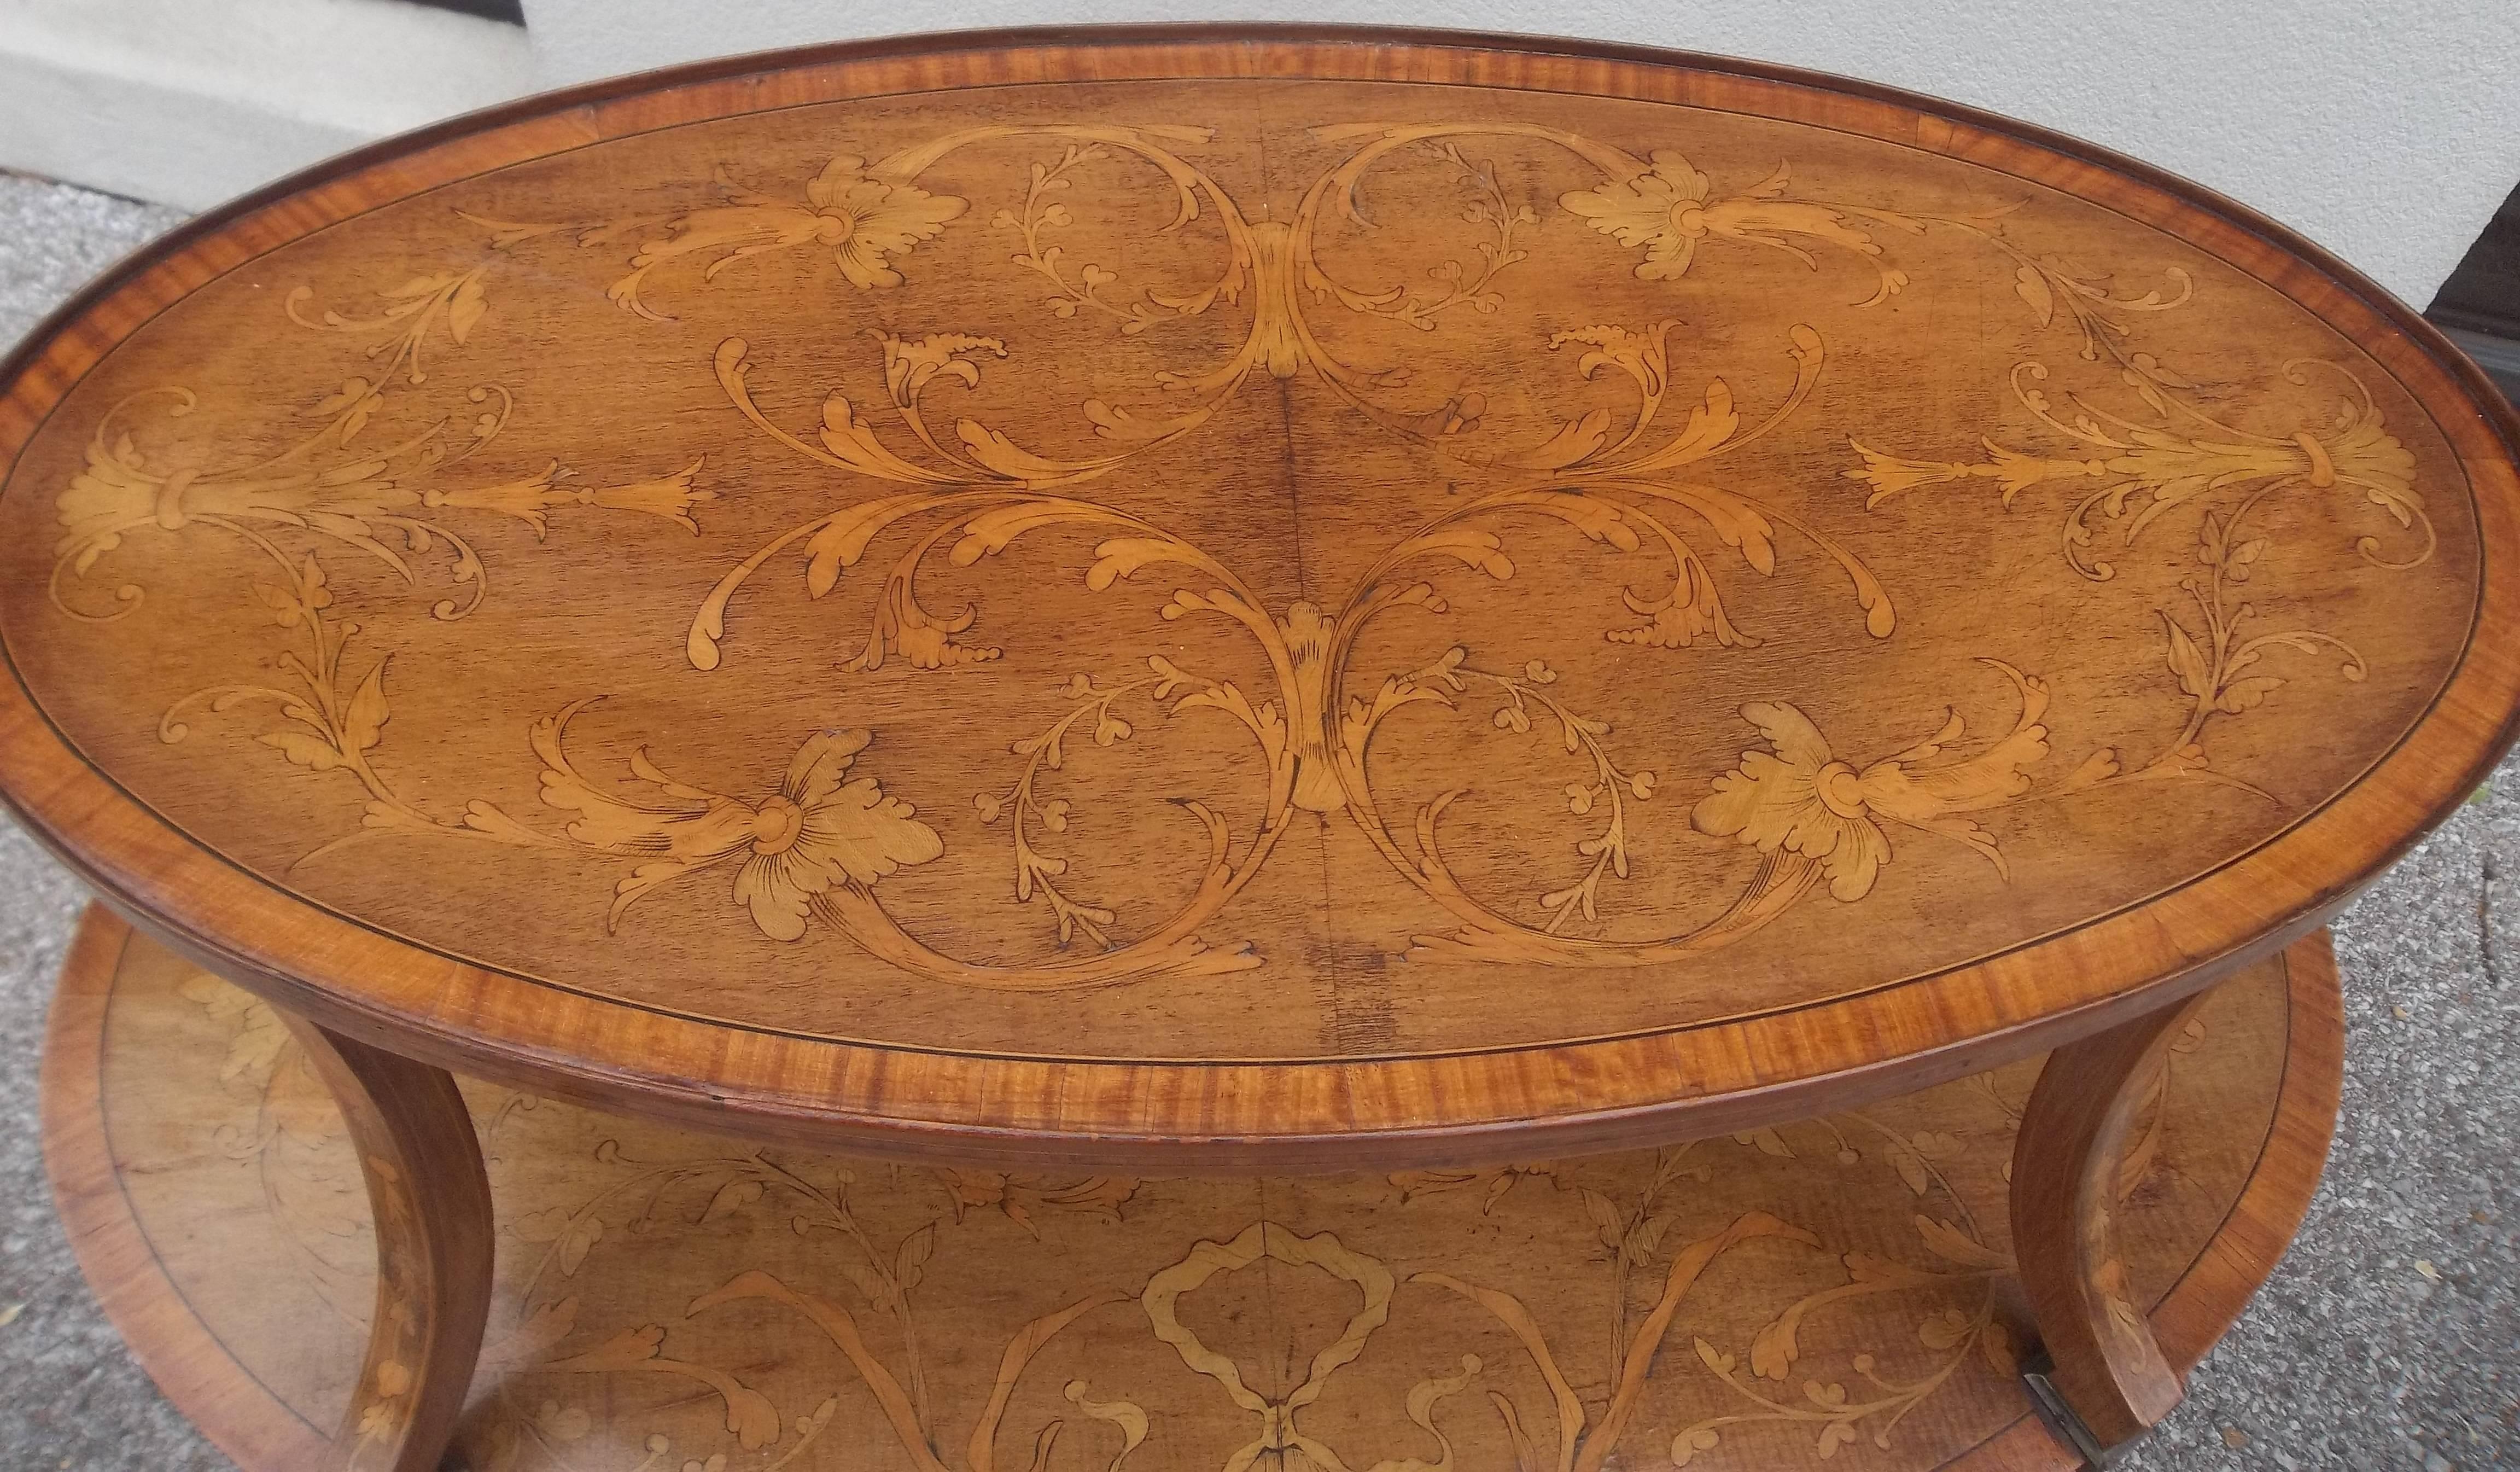 With sycamore, boxwood, mahogany inlays. In the English Adam style (known as in the French taste to the English). 

English, circa 1890-1910.

Typical age issues, minor staining or darkening in scattered areas. Losses ,lifting general aging .